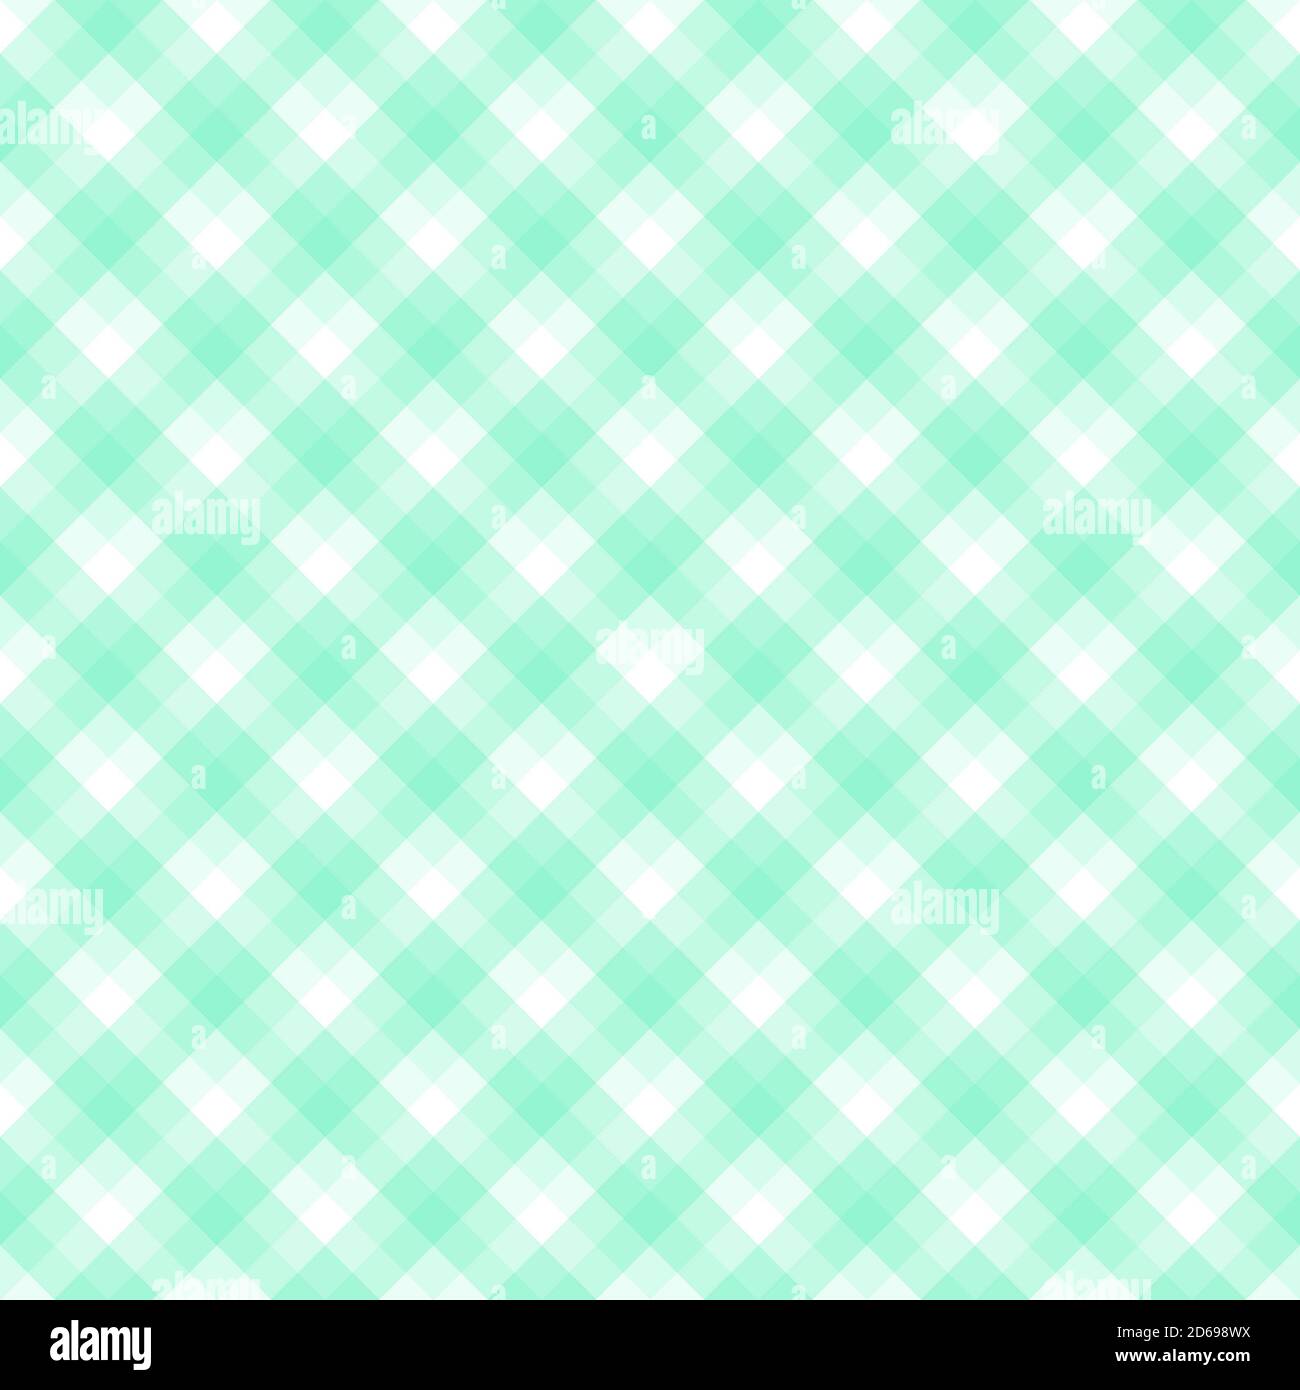 Checker pattern in hues of mint green and white, seamless background Stock Photo